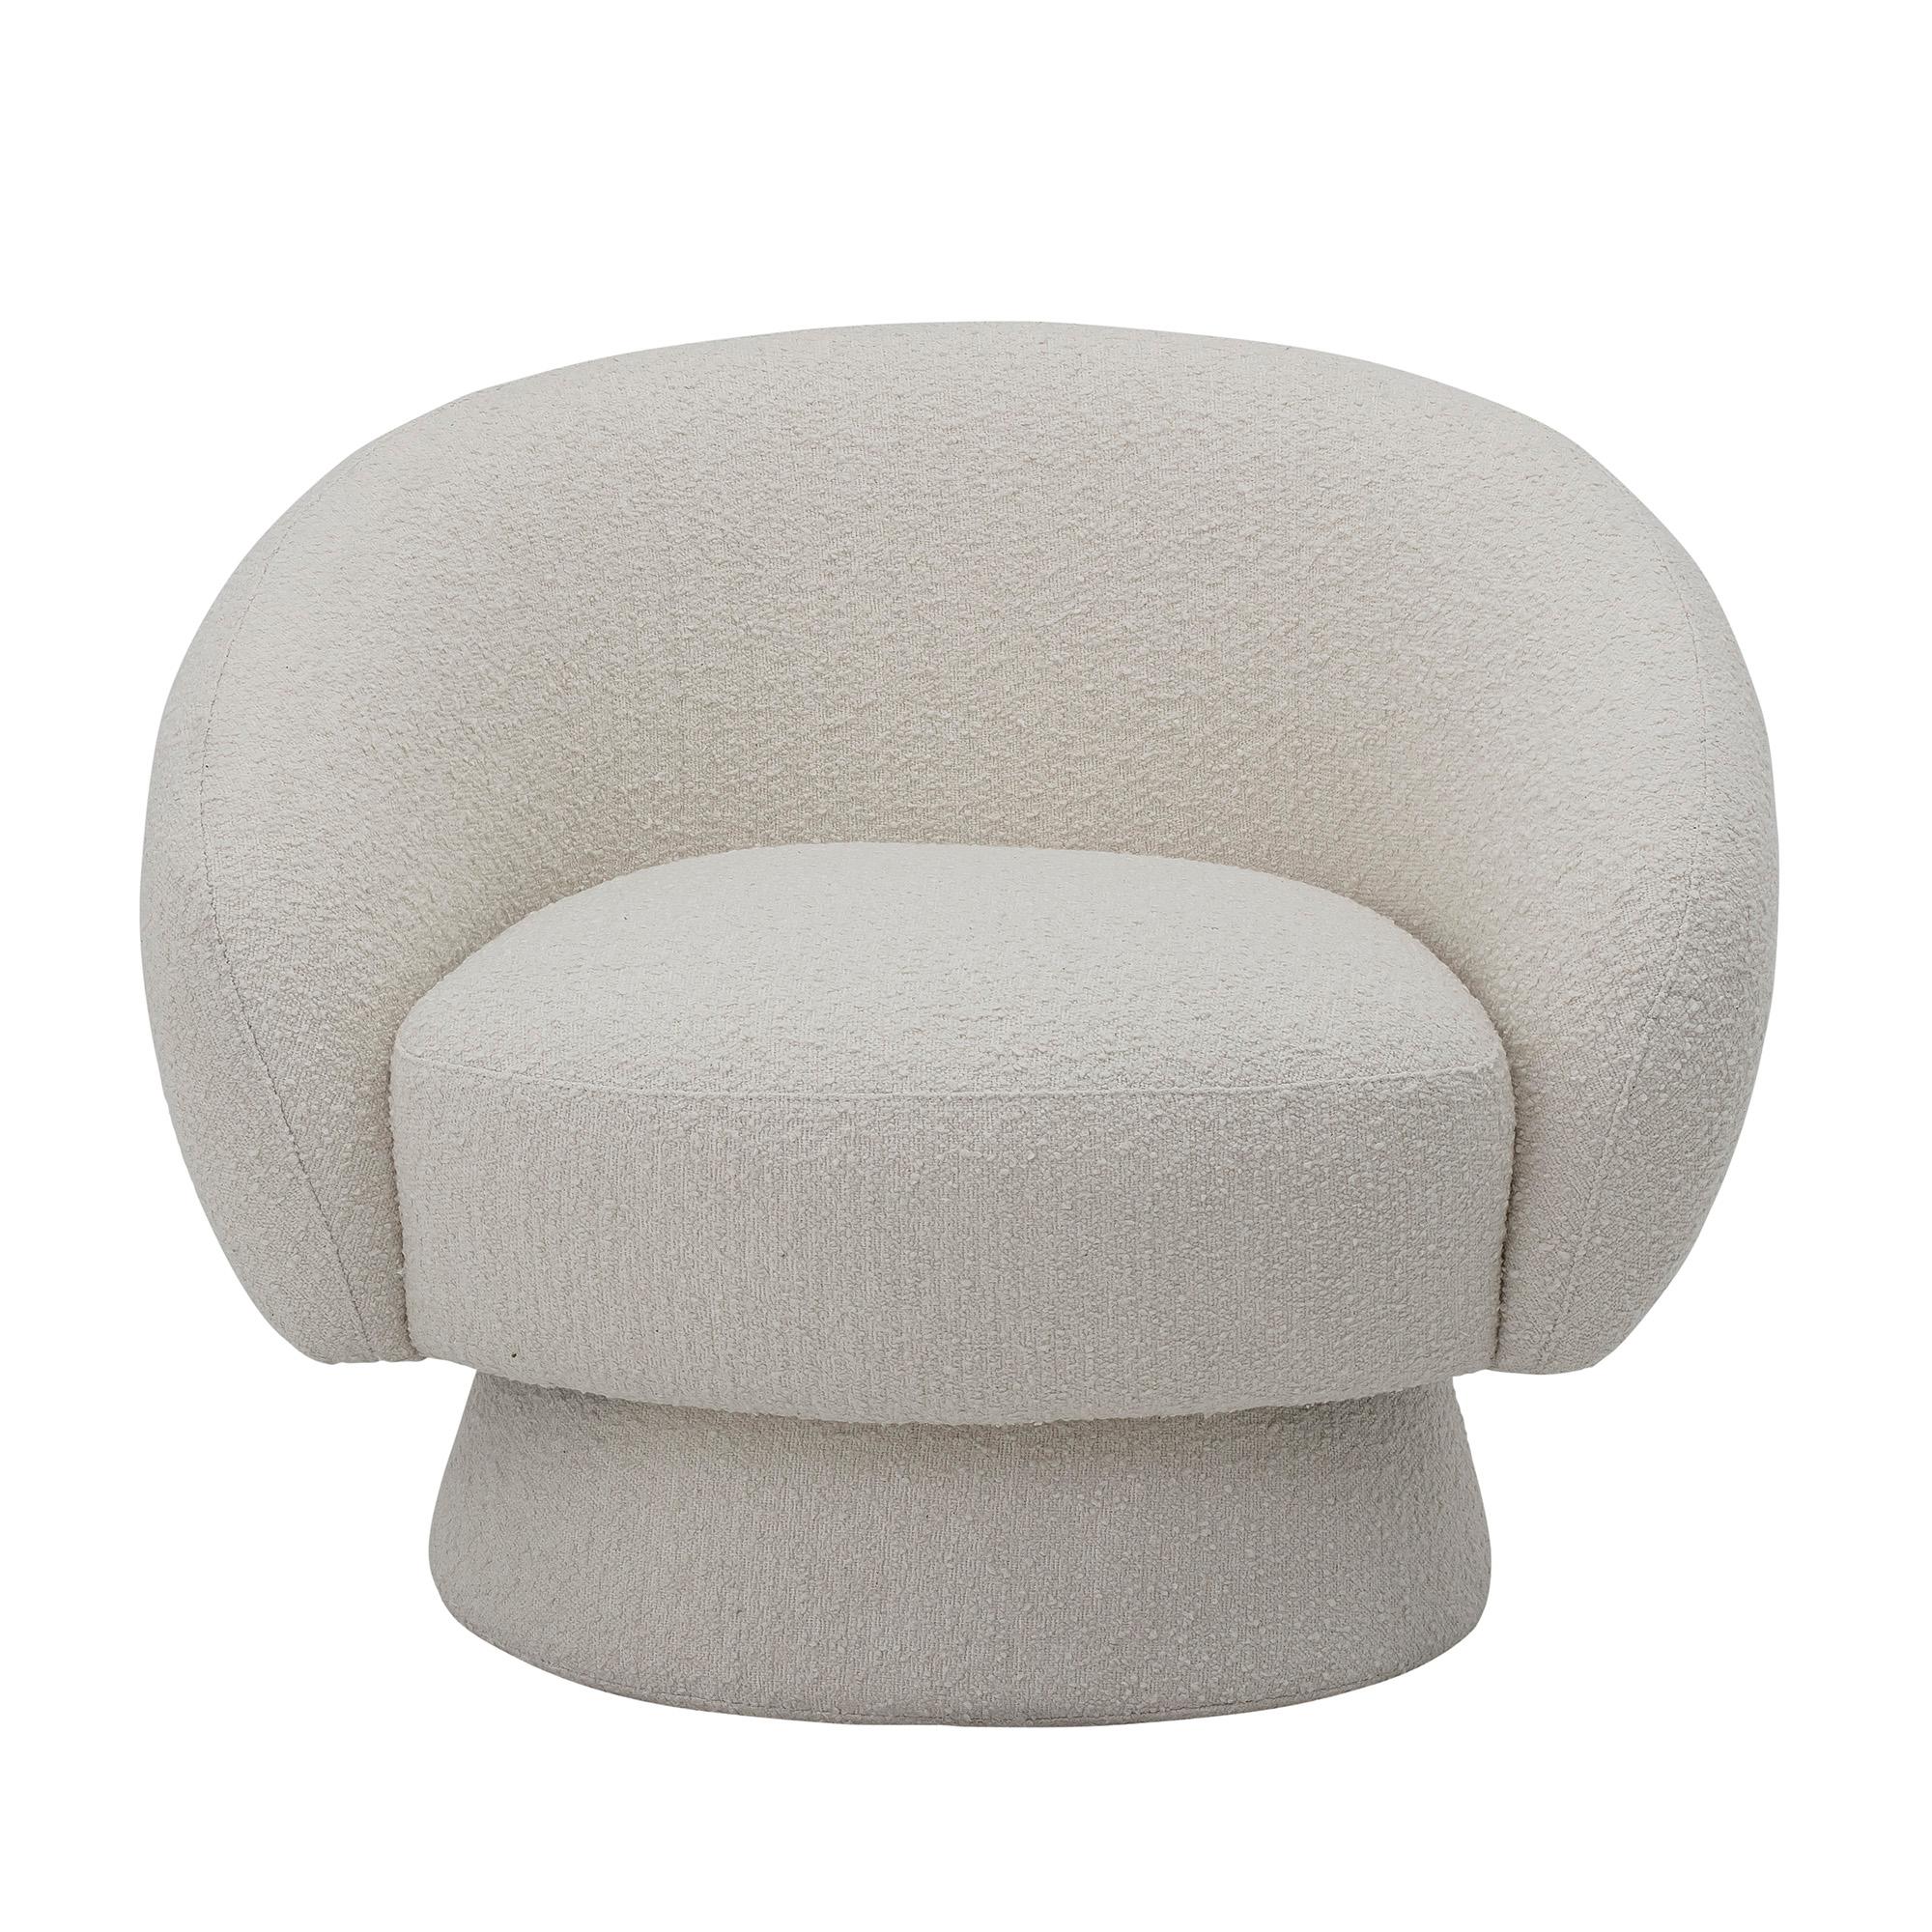 Curved formed circular base lounge chair with a curved-arm integrated back, hard-wood frame. Standard model in an off-white bouclé fabric. This item is available as shown and ready to ship.